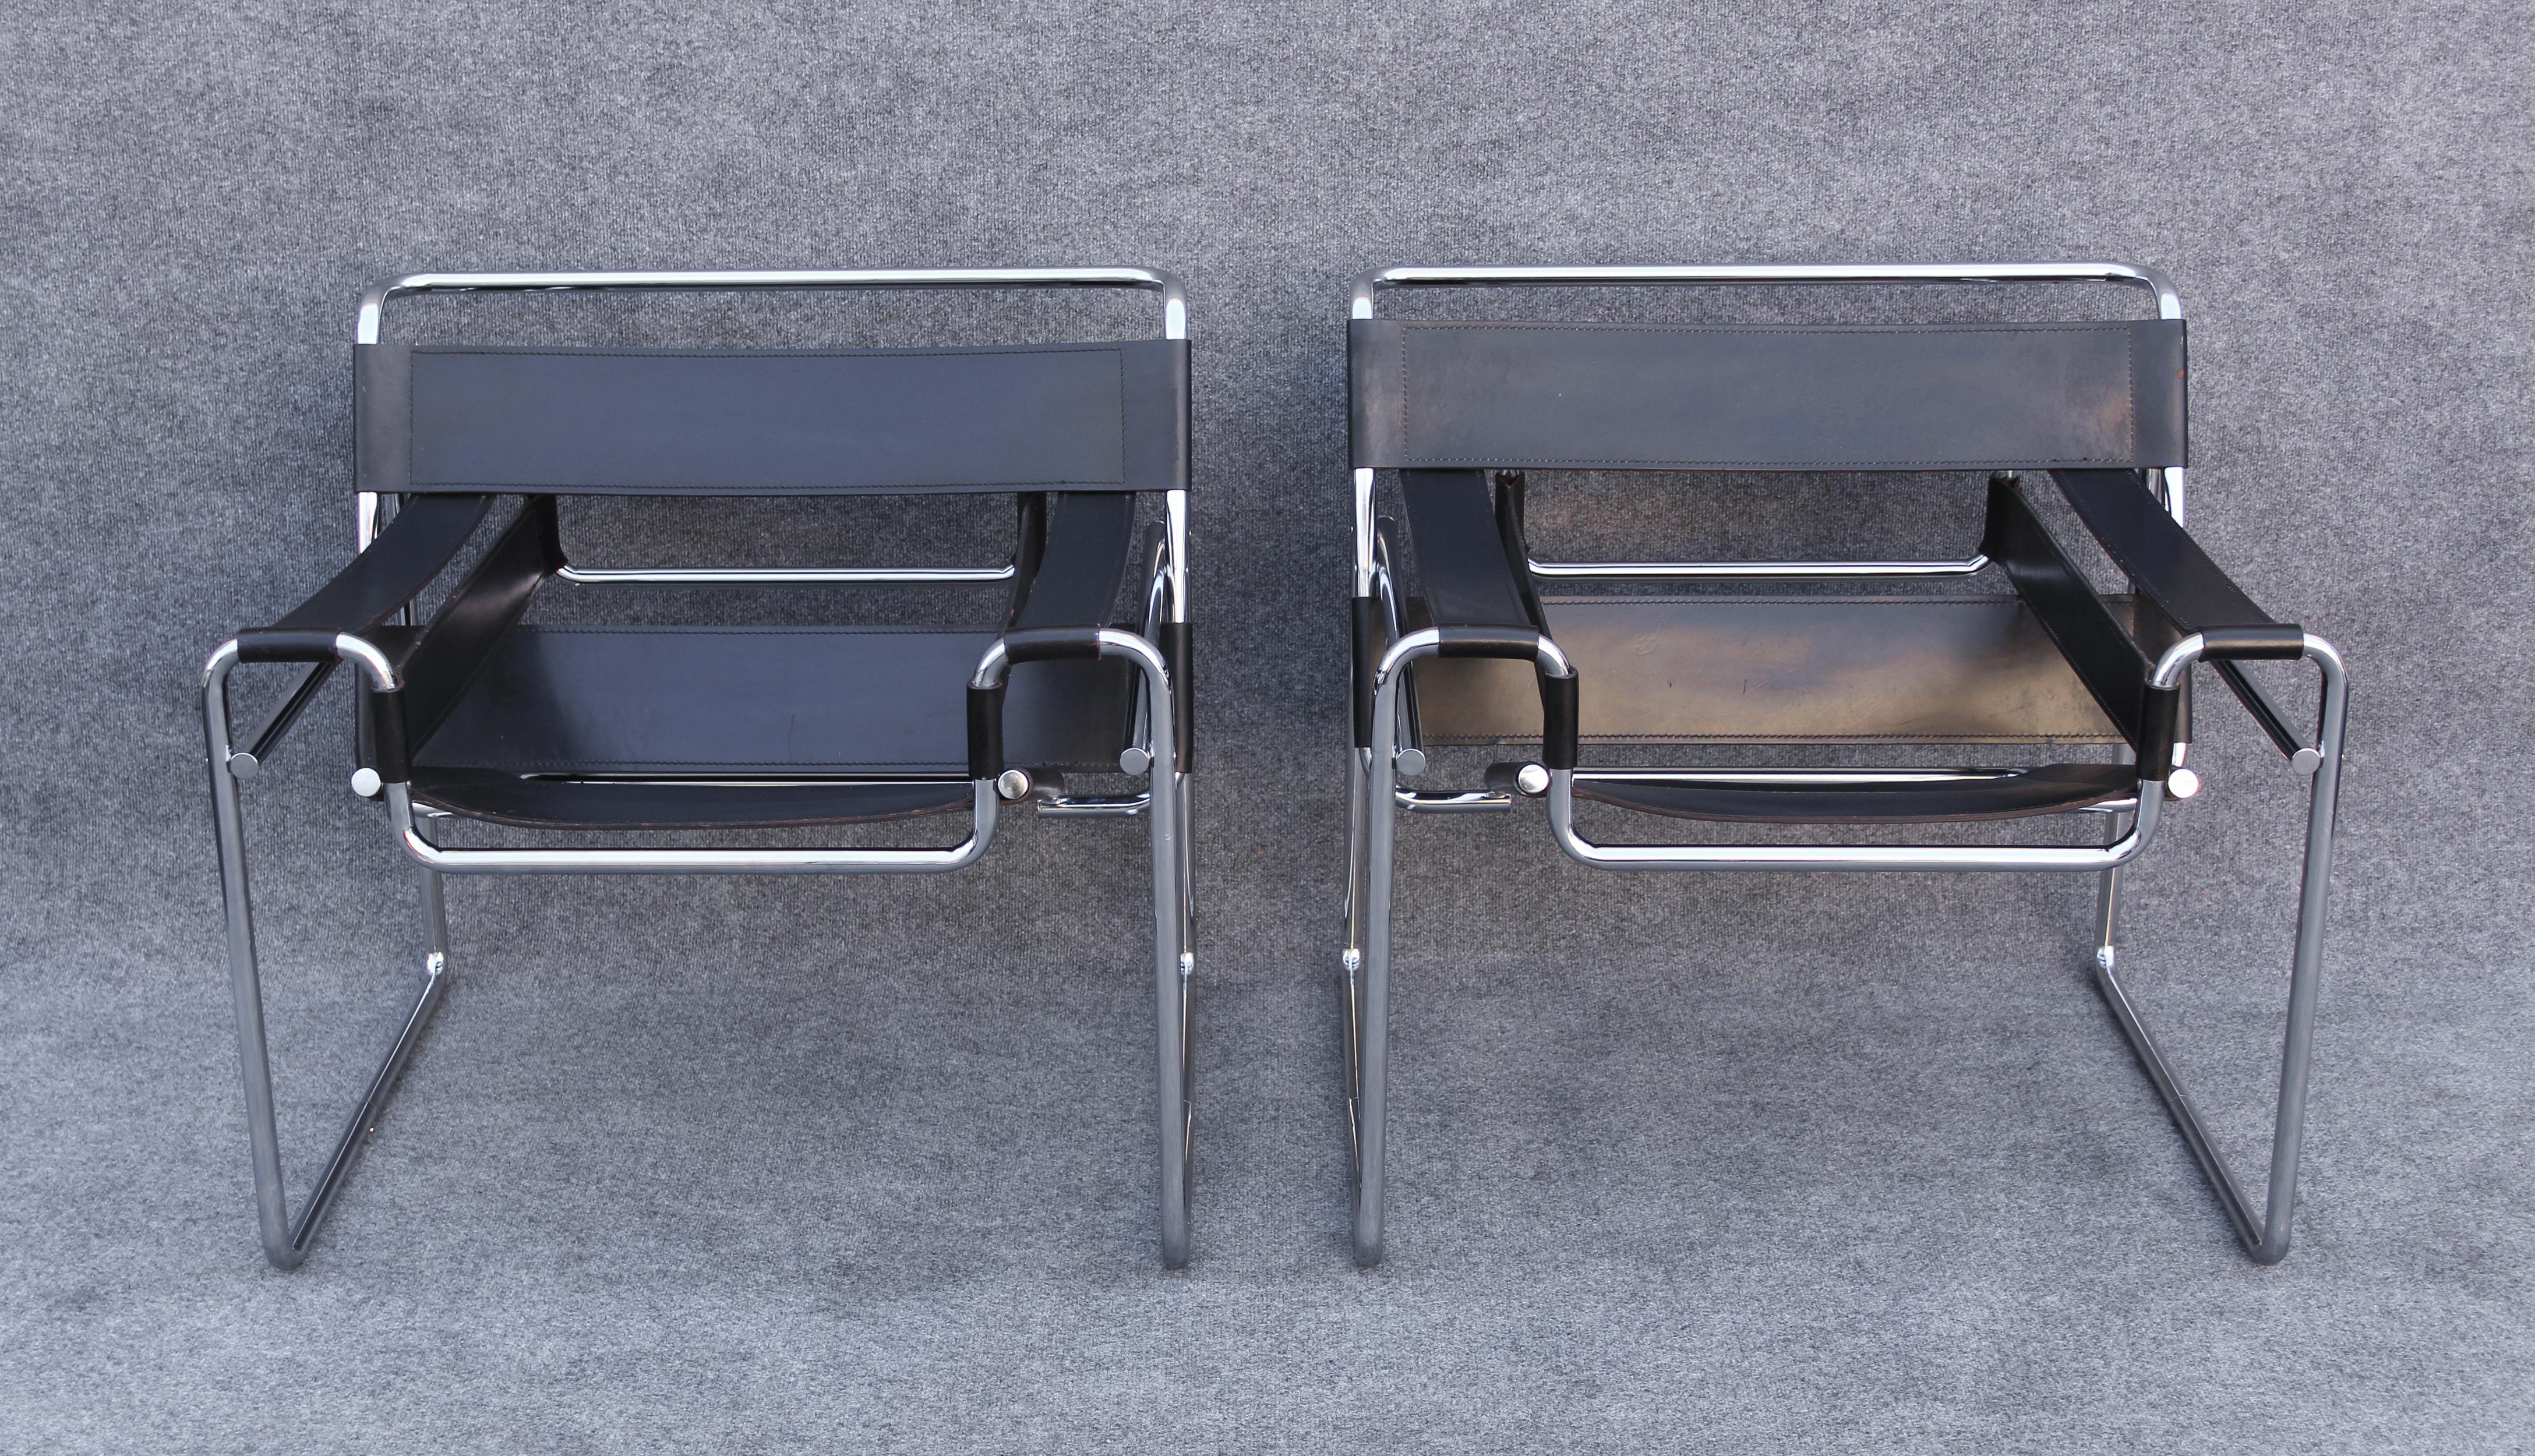 Designed by Bauhaus legend Marcel Breuer, these iconic chairs were made by the collaborative efforts of Stendig and Gavina during the mid to late 1960s. Stendig was not always just an importer and, for a time, had the exclusive manufacturing rights